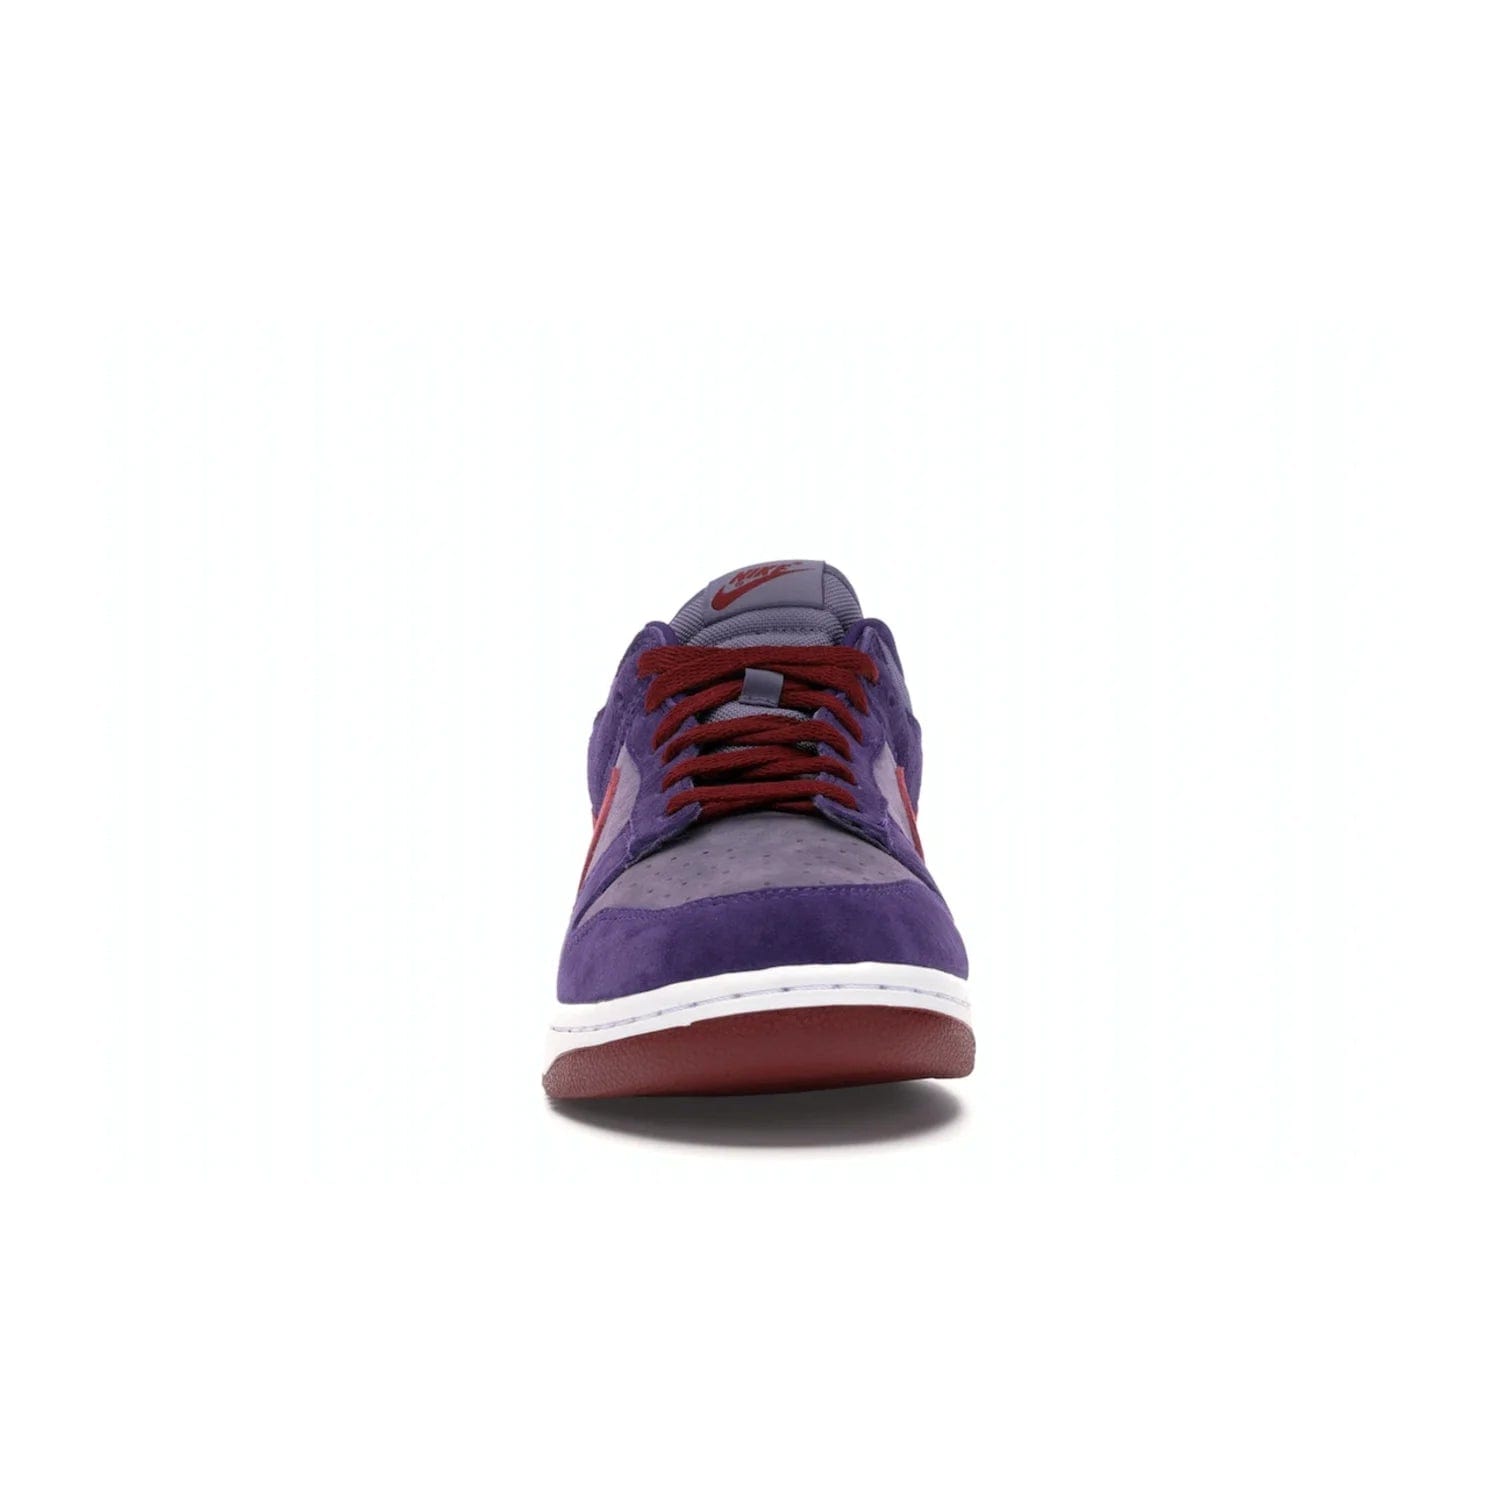 Nike Dunk Low Plum (2020) - Image 10 - Only at www.BallersClubKickz.com - Elevate your look with the Nike Dunk Low Plum (2020). Featuring a bold purple colorway, this retro-inspired silhouette is constructed of premium suede and makes for a must-have for any sneakerhead.